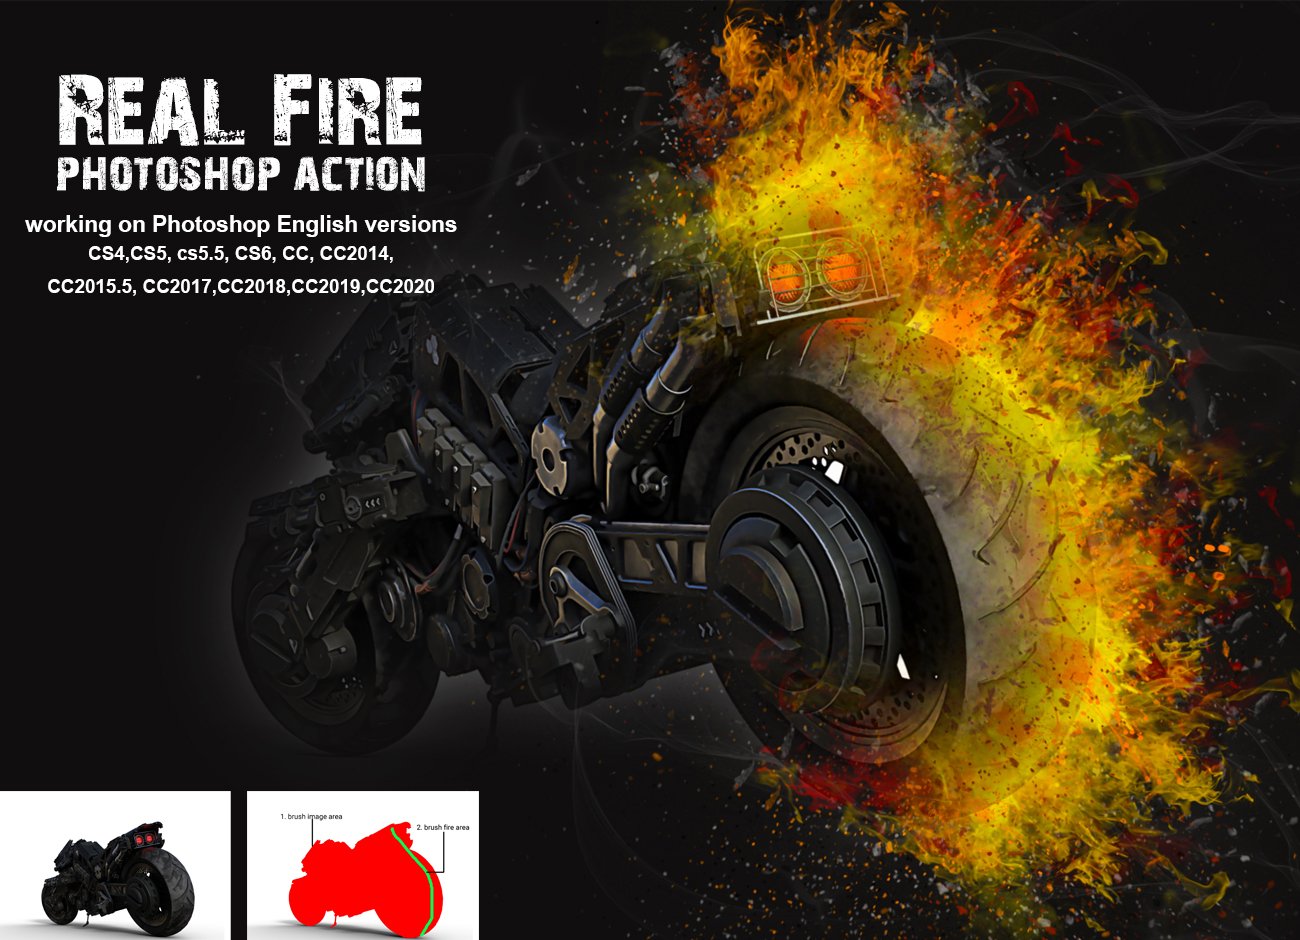 Real Fire Photoshop Actioncover image.